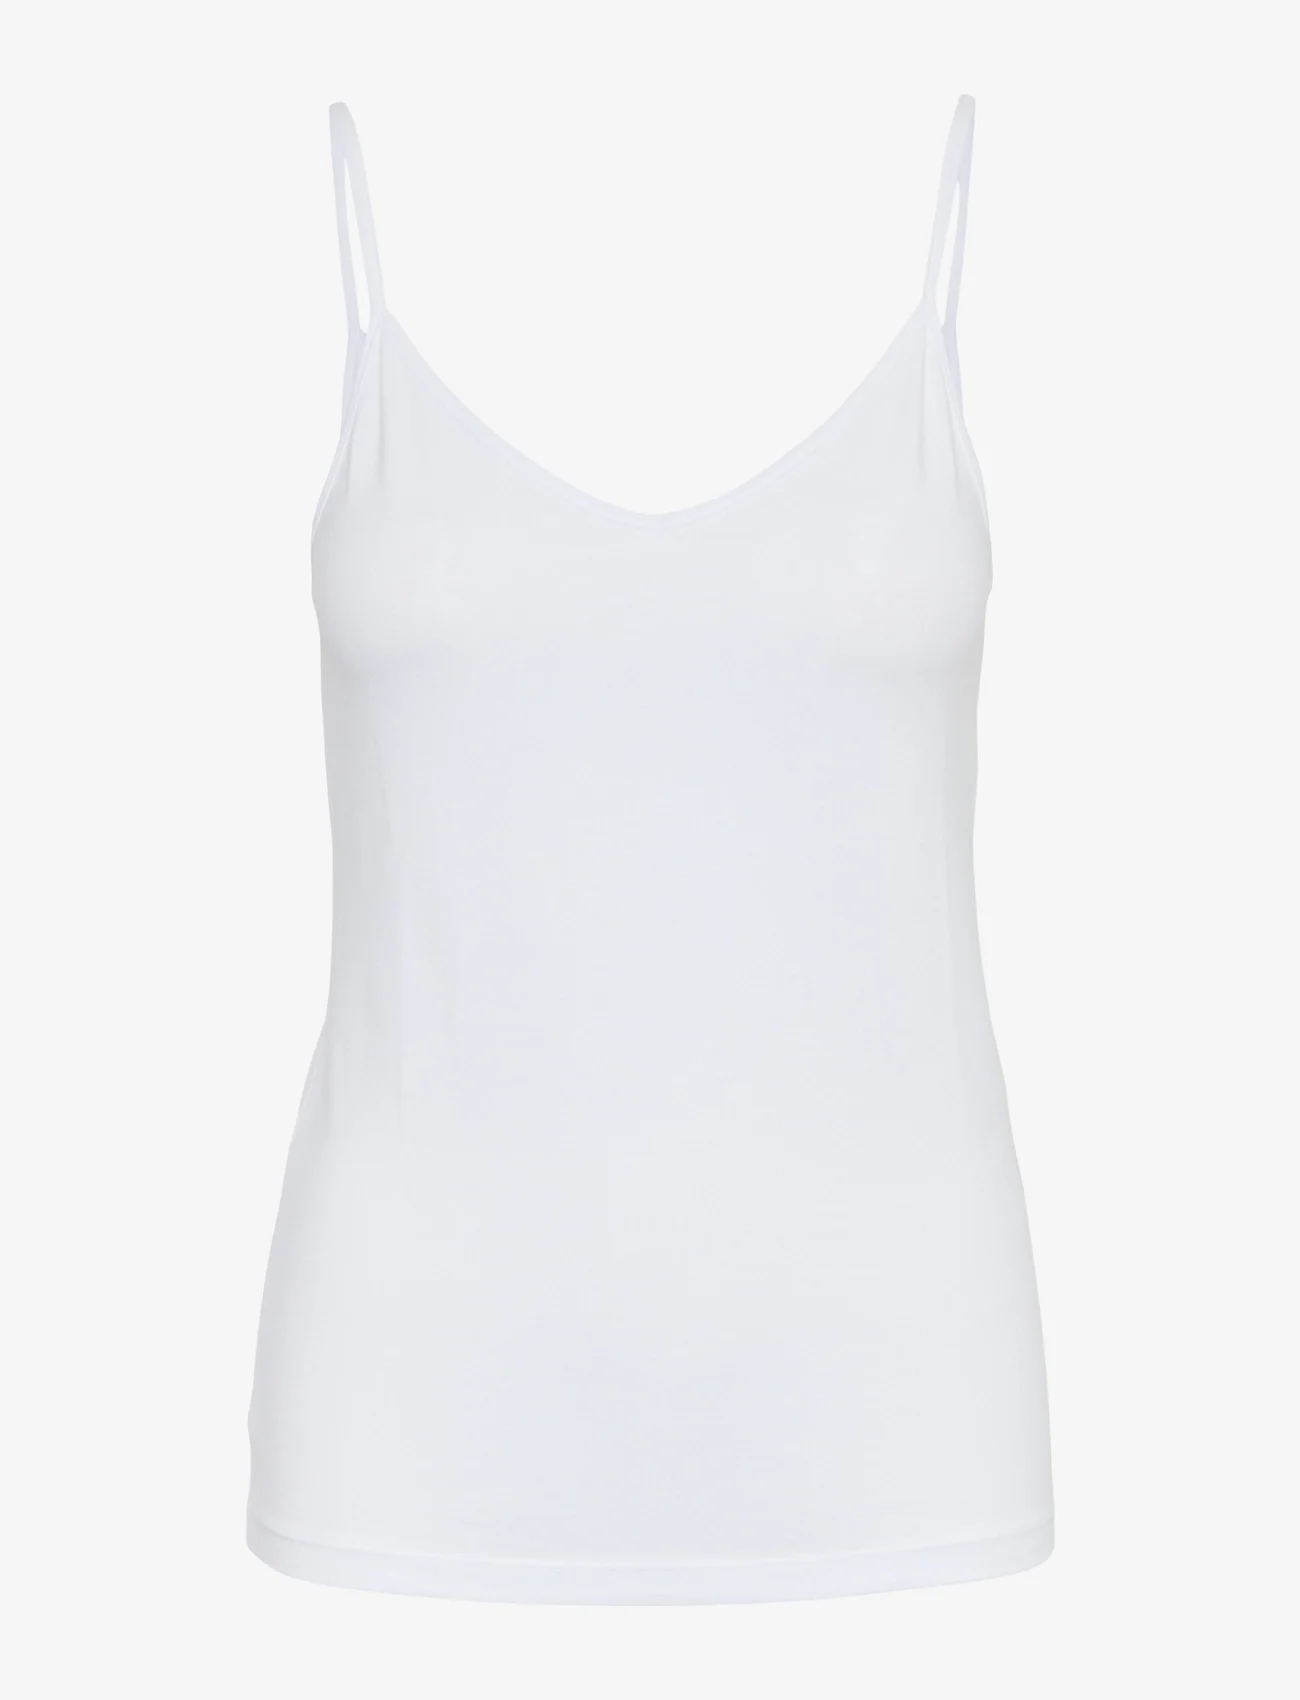 Pieces - PCSIRENE SINGLET NOOS - lowest prices - bright white - 0